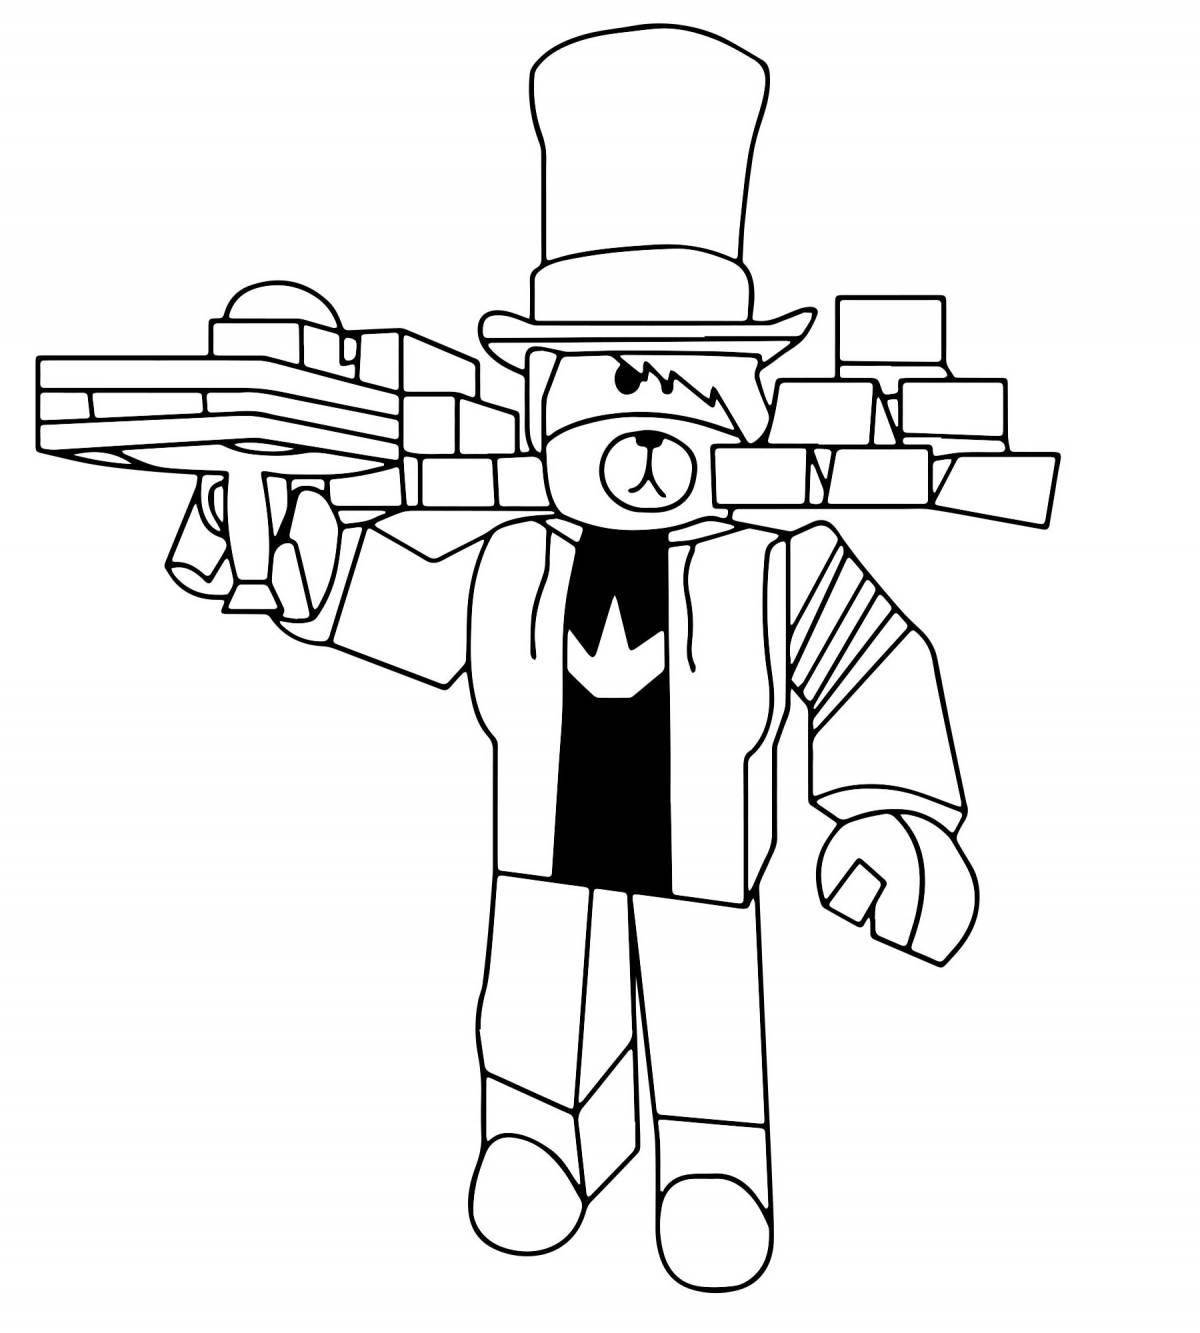 Colorful roblox marder mystery 2 coloring page